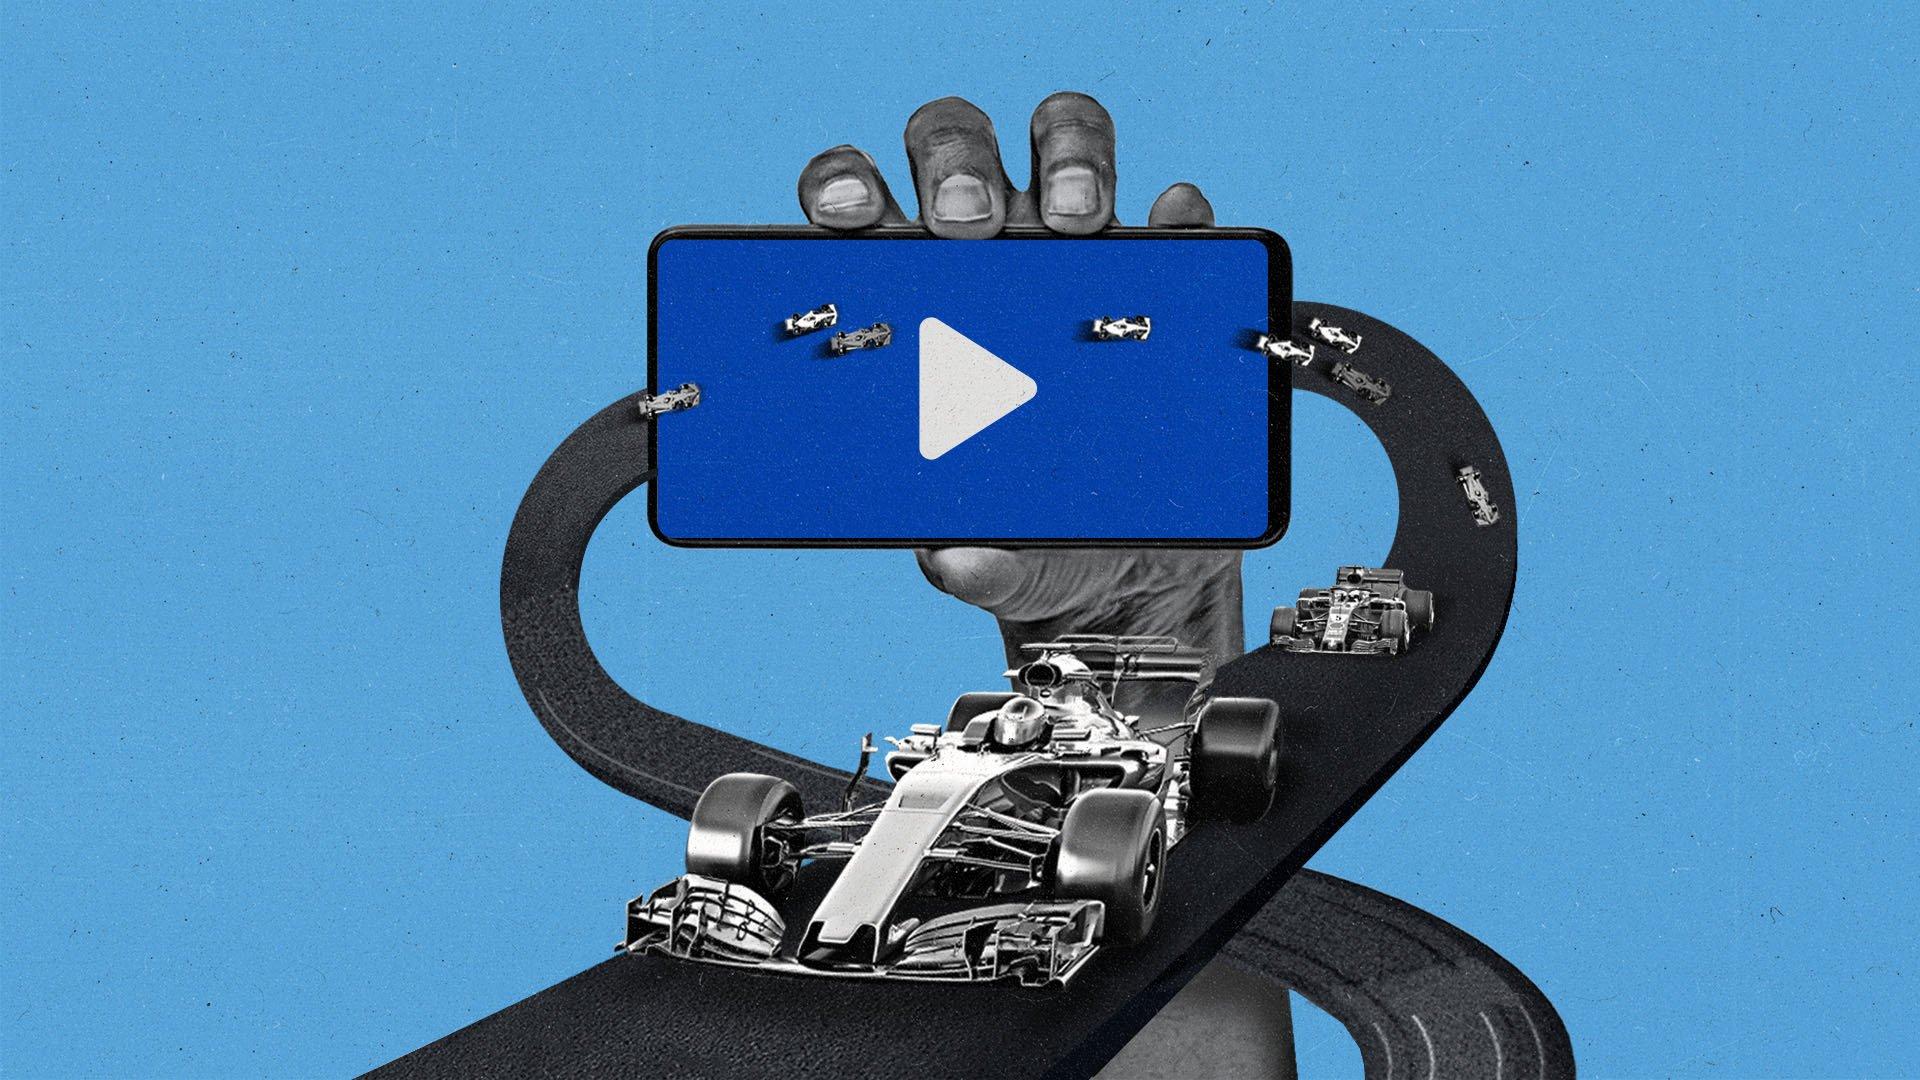 A hand horizontally gripping a smartphone with a play button on it, and racecars on an 8-shaped track entering left and exiting right